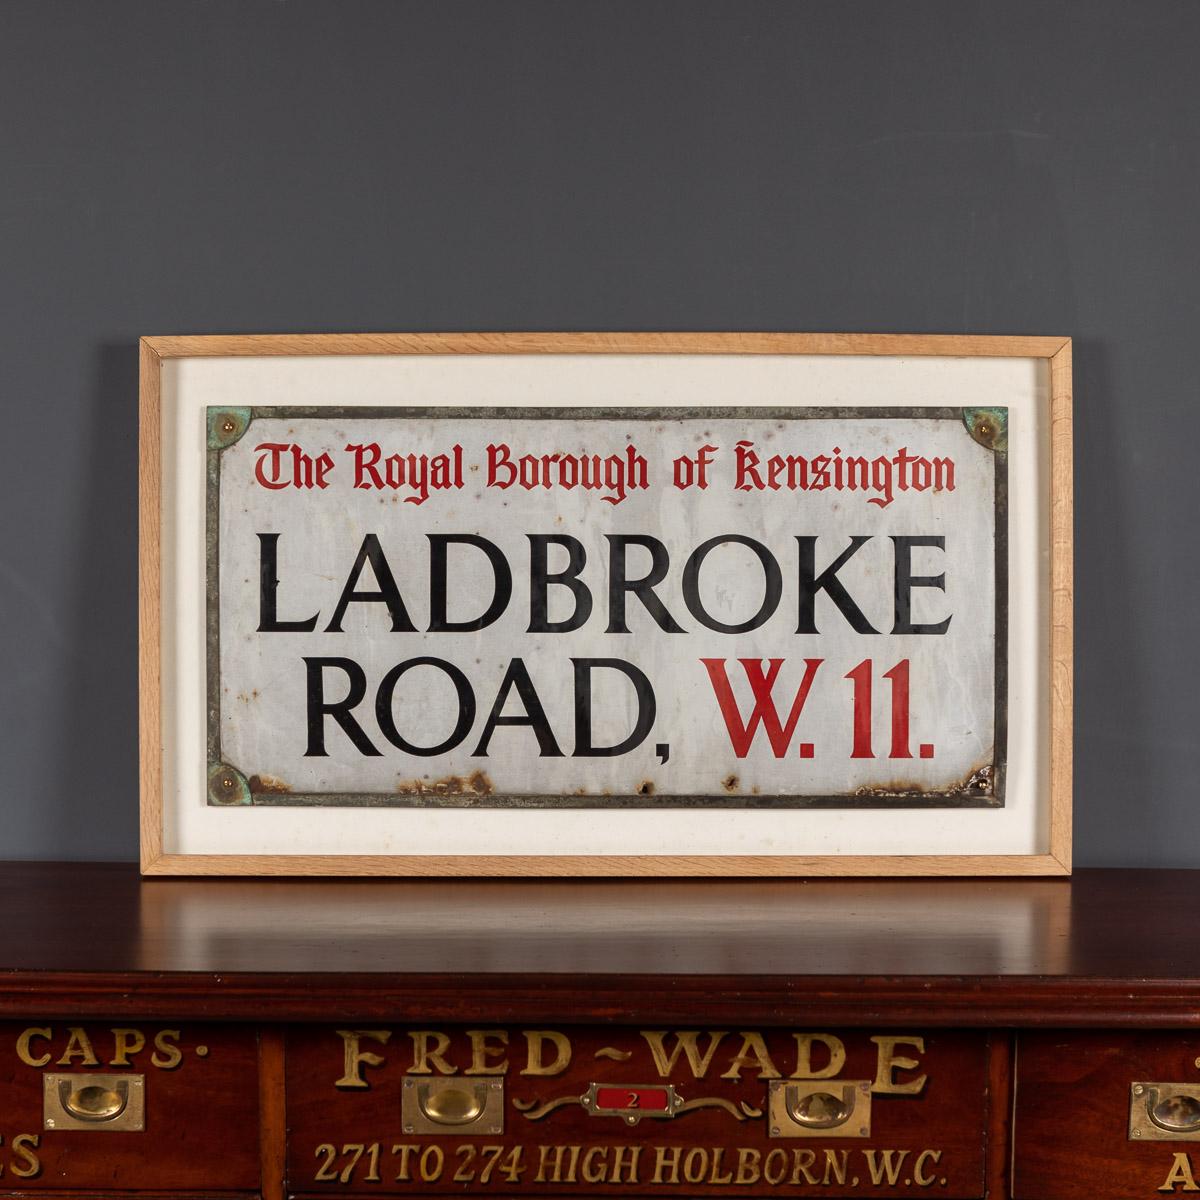 Antique early-20th century Ladbroke Rd W11 street sign, enamel on metal, Royal Borough of Kensington, from the 1900's. Comes in a newly made frame, a truly wonderful conversation piece capable of transporting the imagination to a bygone